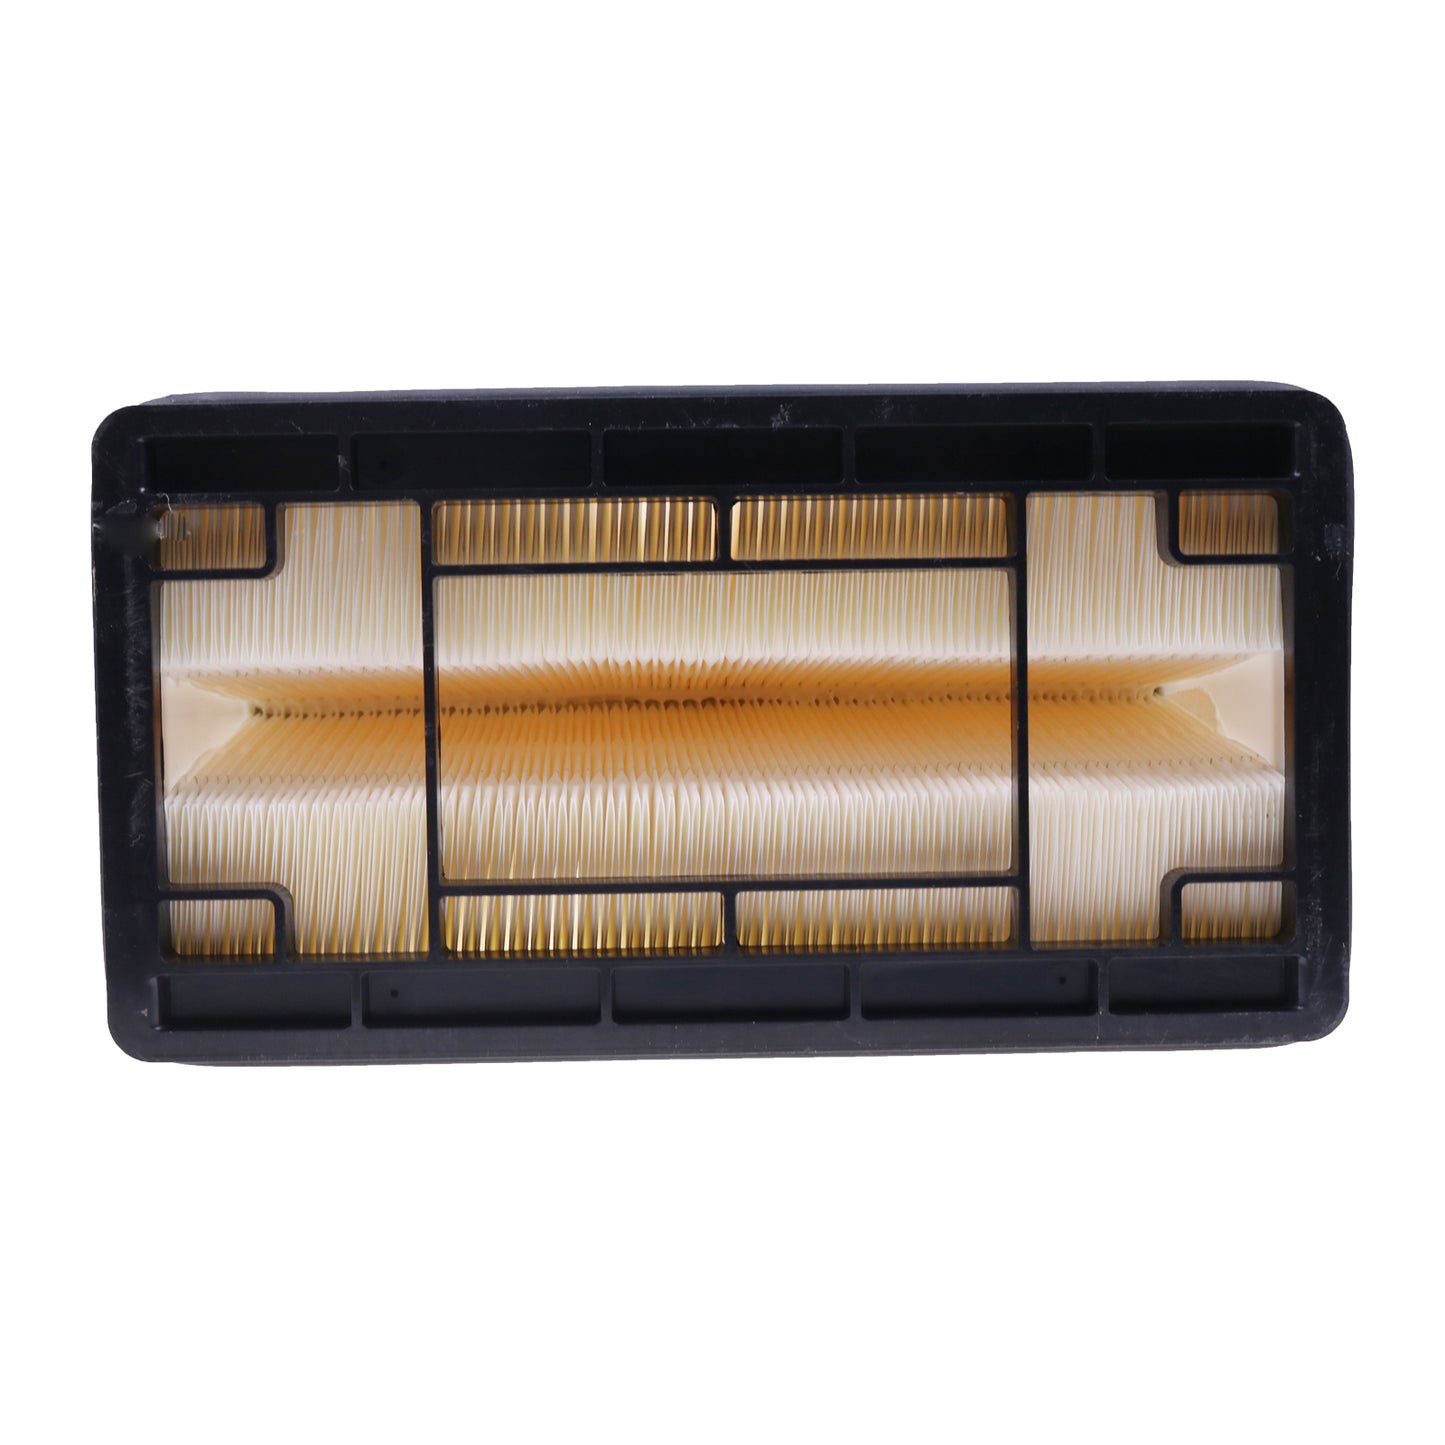 New 7286652 7010030 Outer Air Filter Compatible with Bobcat A770 T740 T750 T770 T870 S740 S750 S770 S850